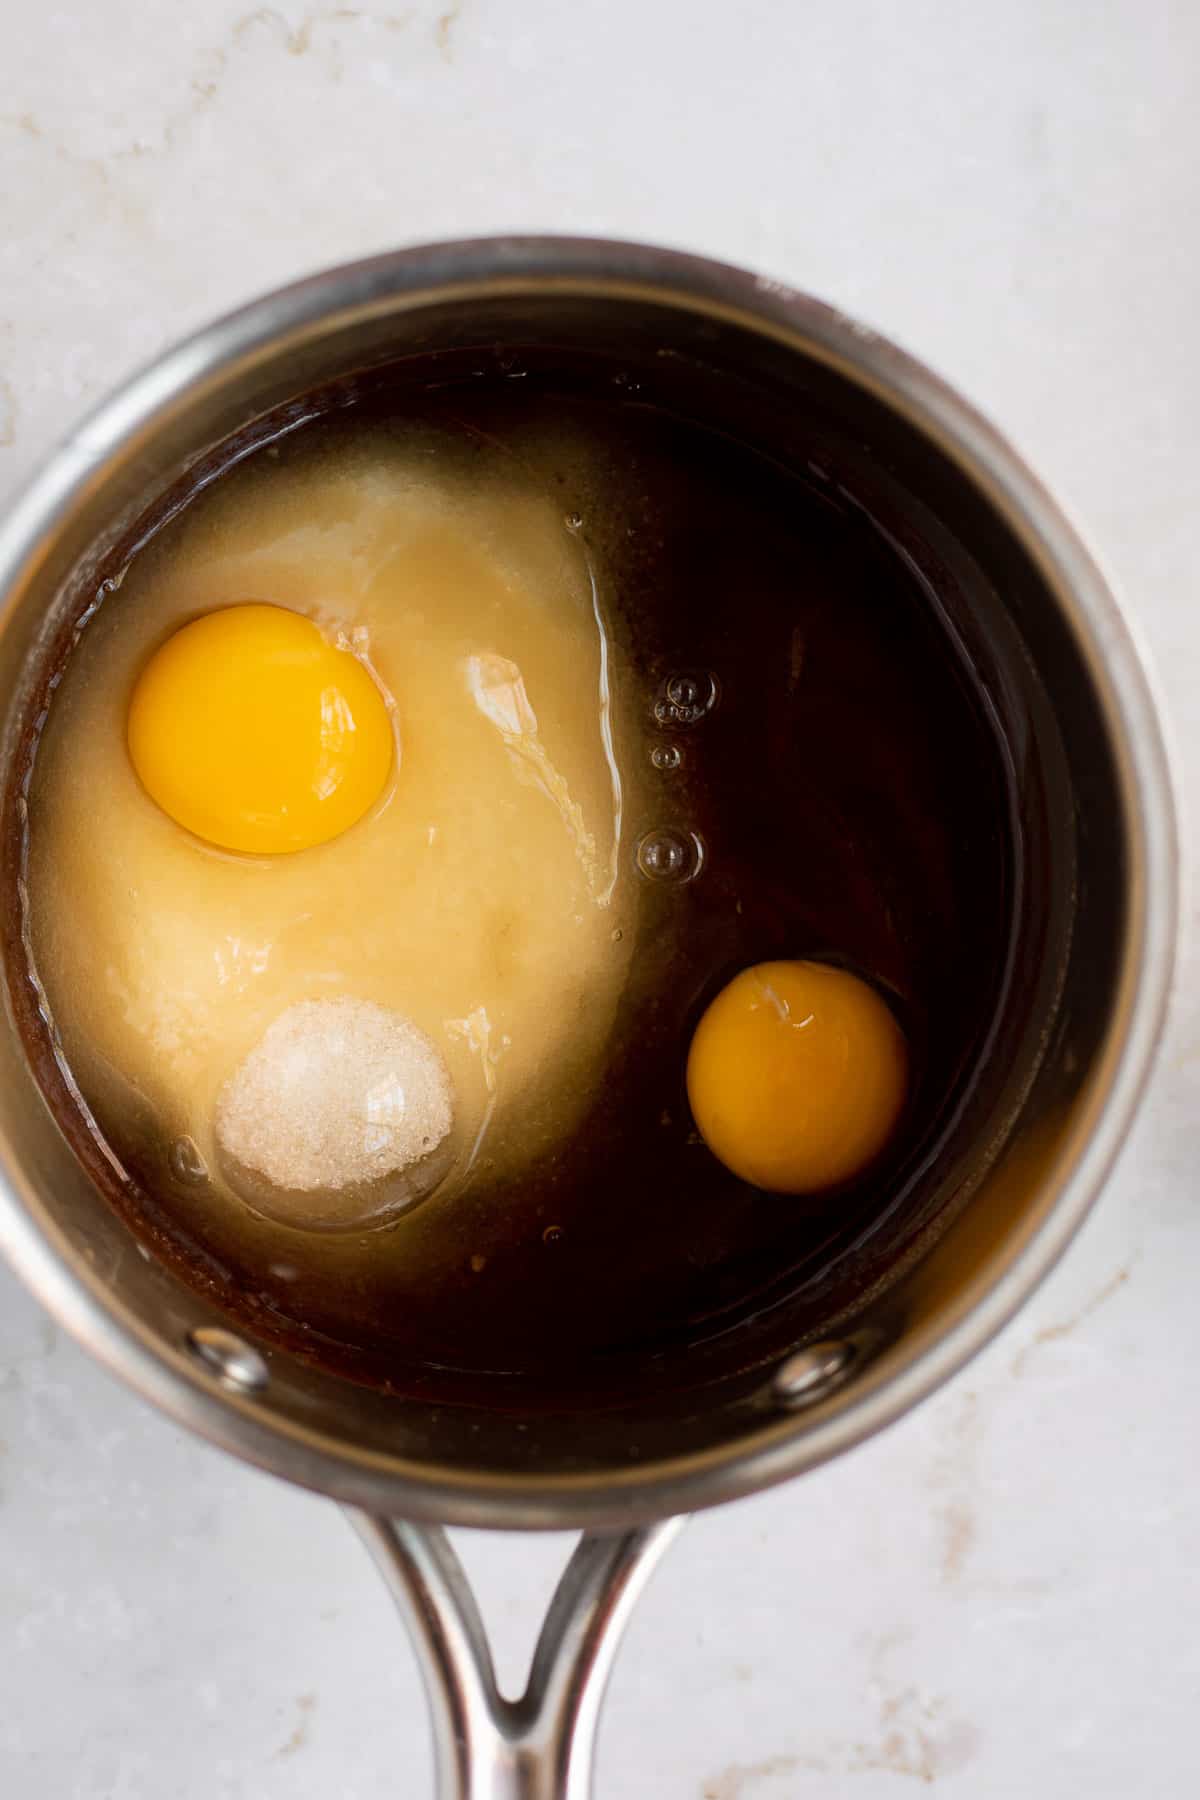 2 eggs and sugar on top of melted chocolate mixture in a pot.